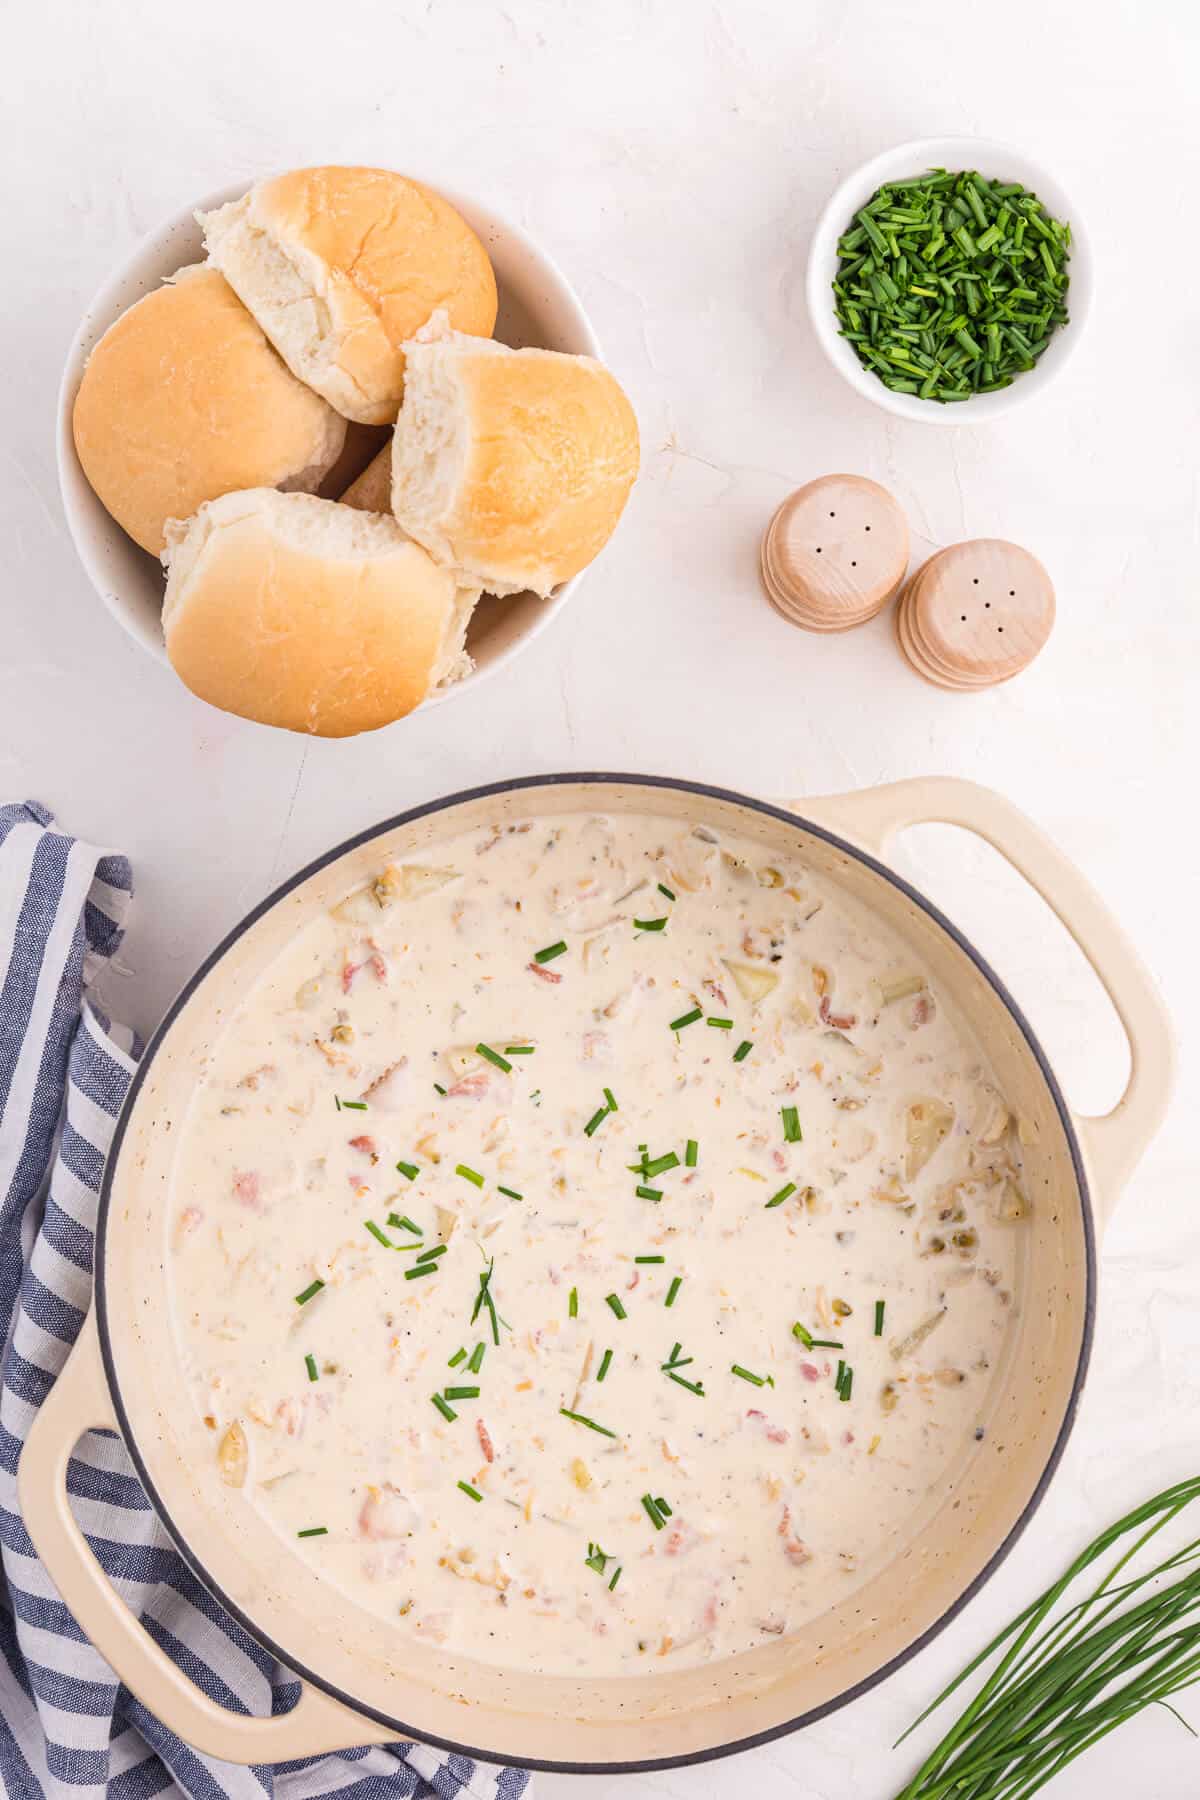 A dutch oven of New England Clam Chowder with rolls and chives.